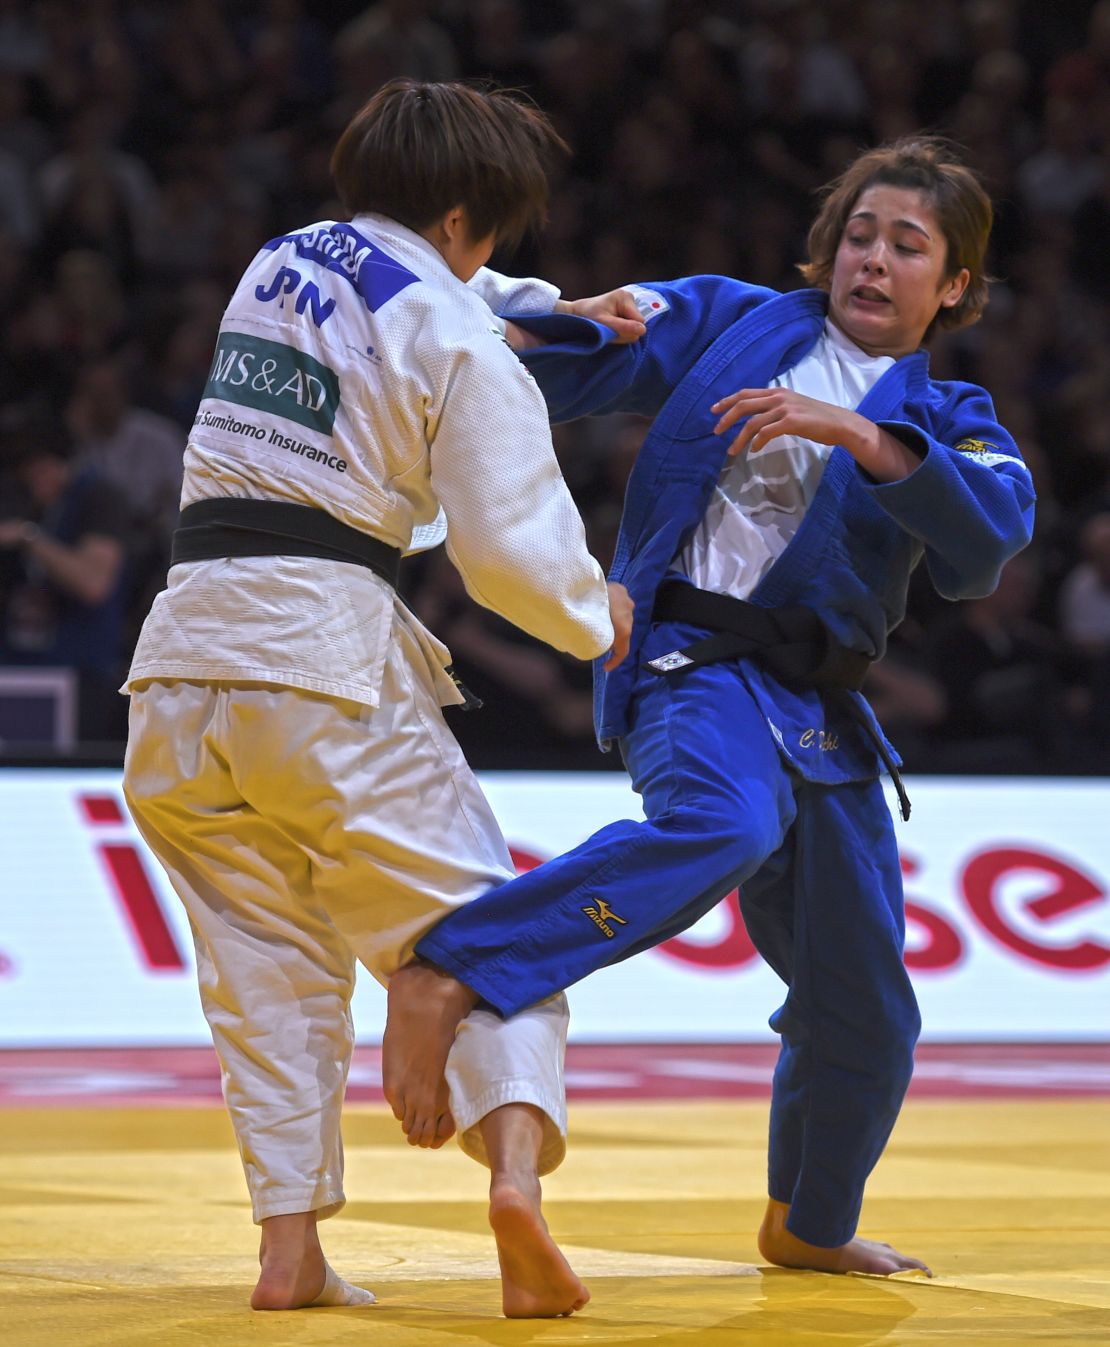 Having won a number of medals for Japan at youth level, Christa Deguchi came back to haunt her former charges in the colors of Canada.